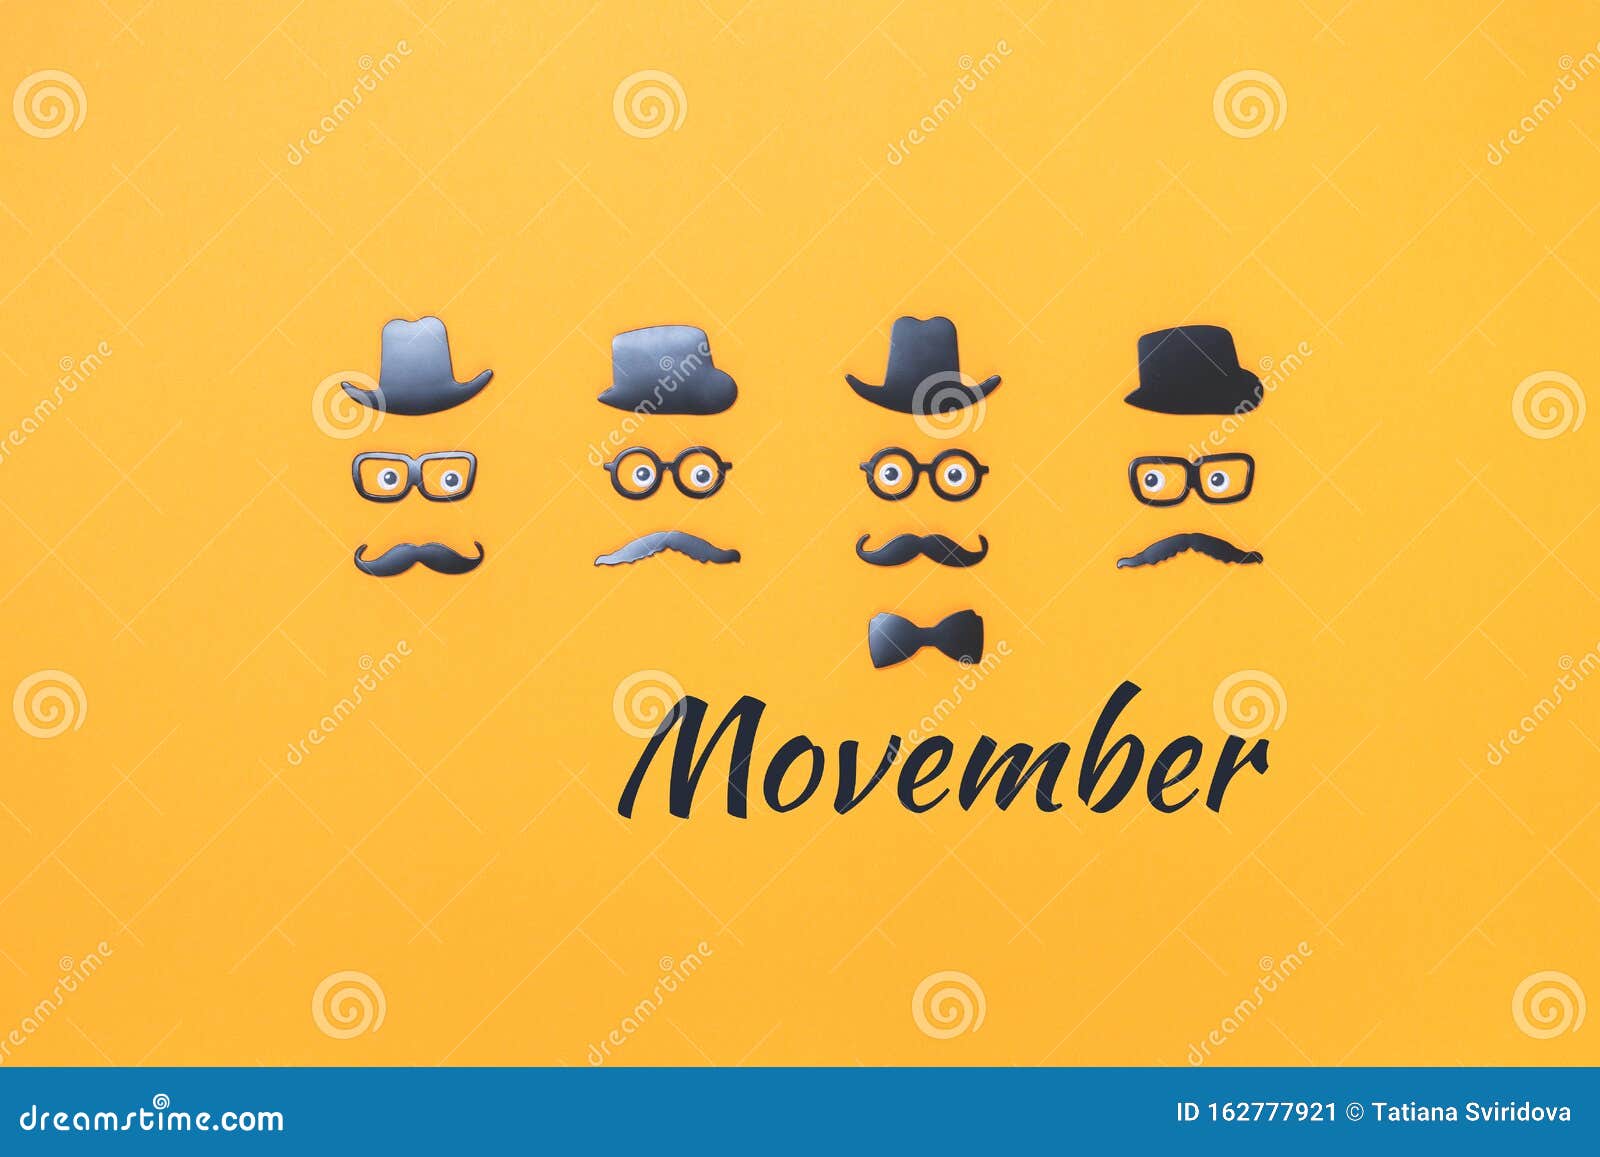 four faces with mustaches for movember on yellow orange